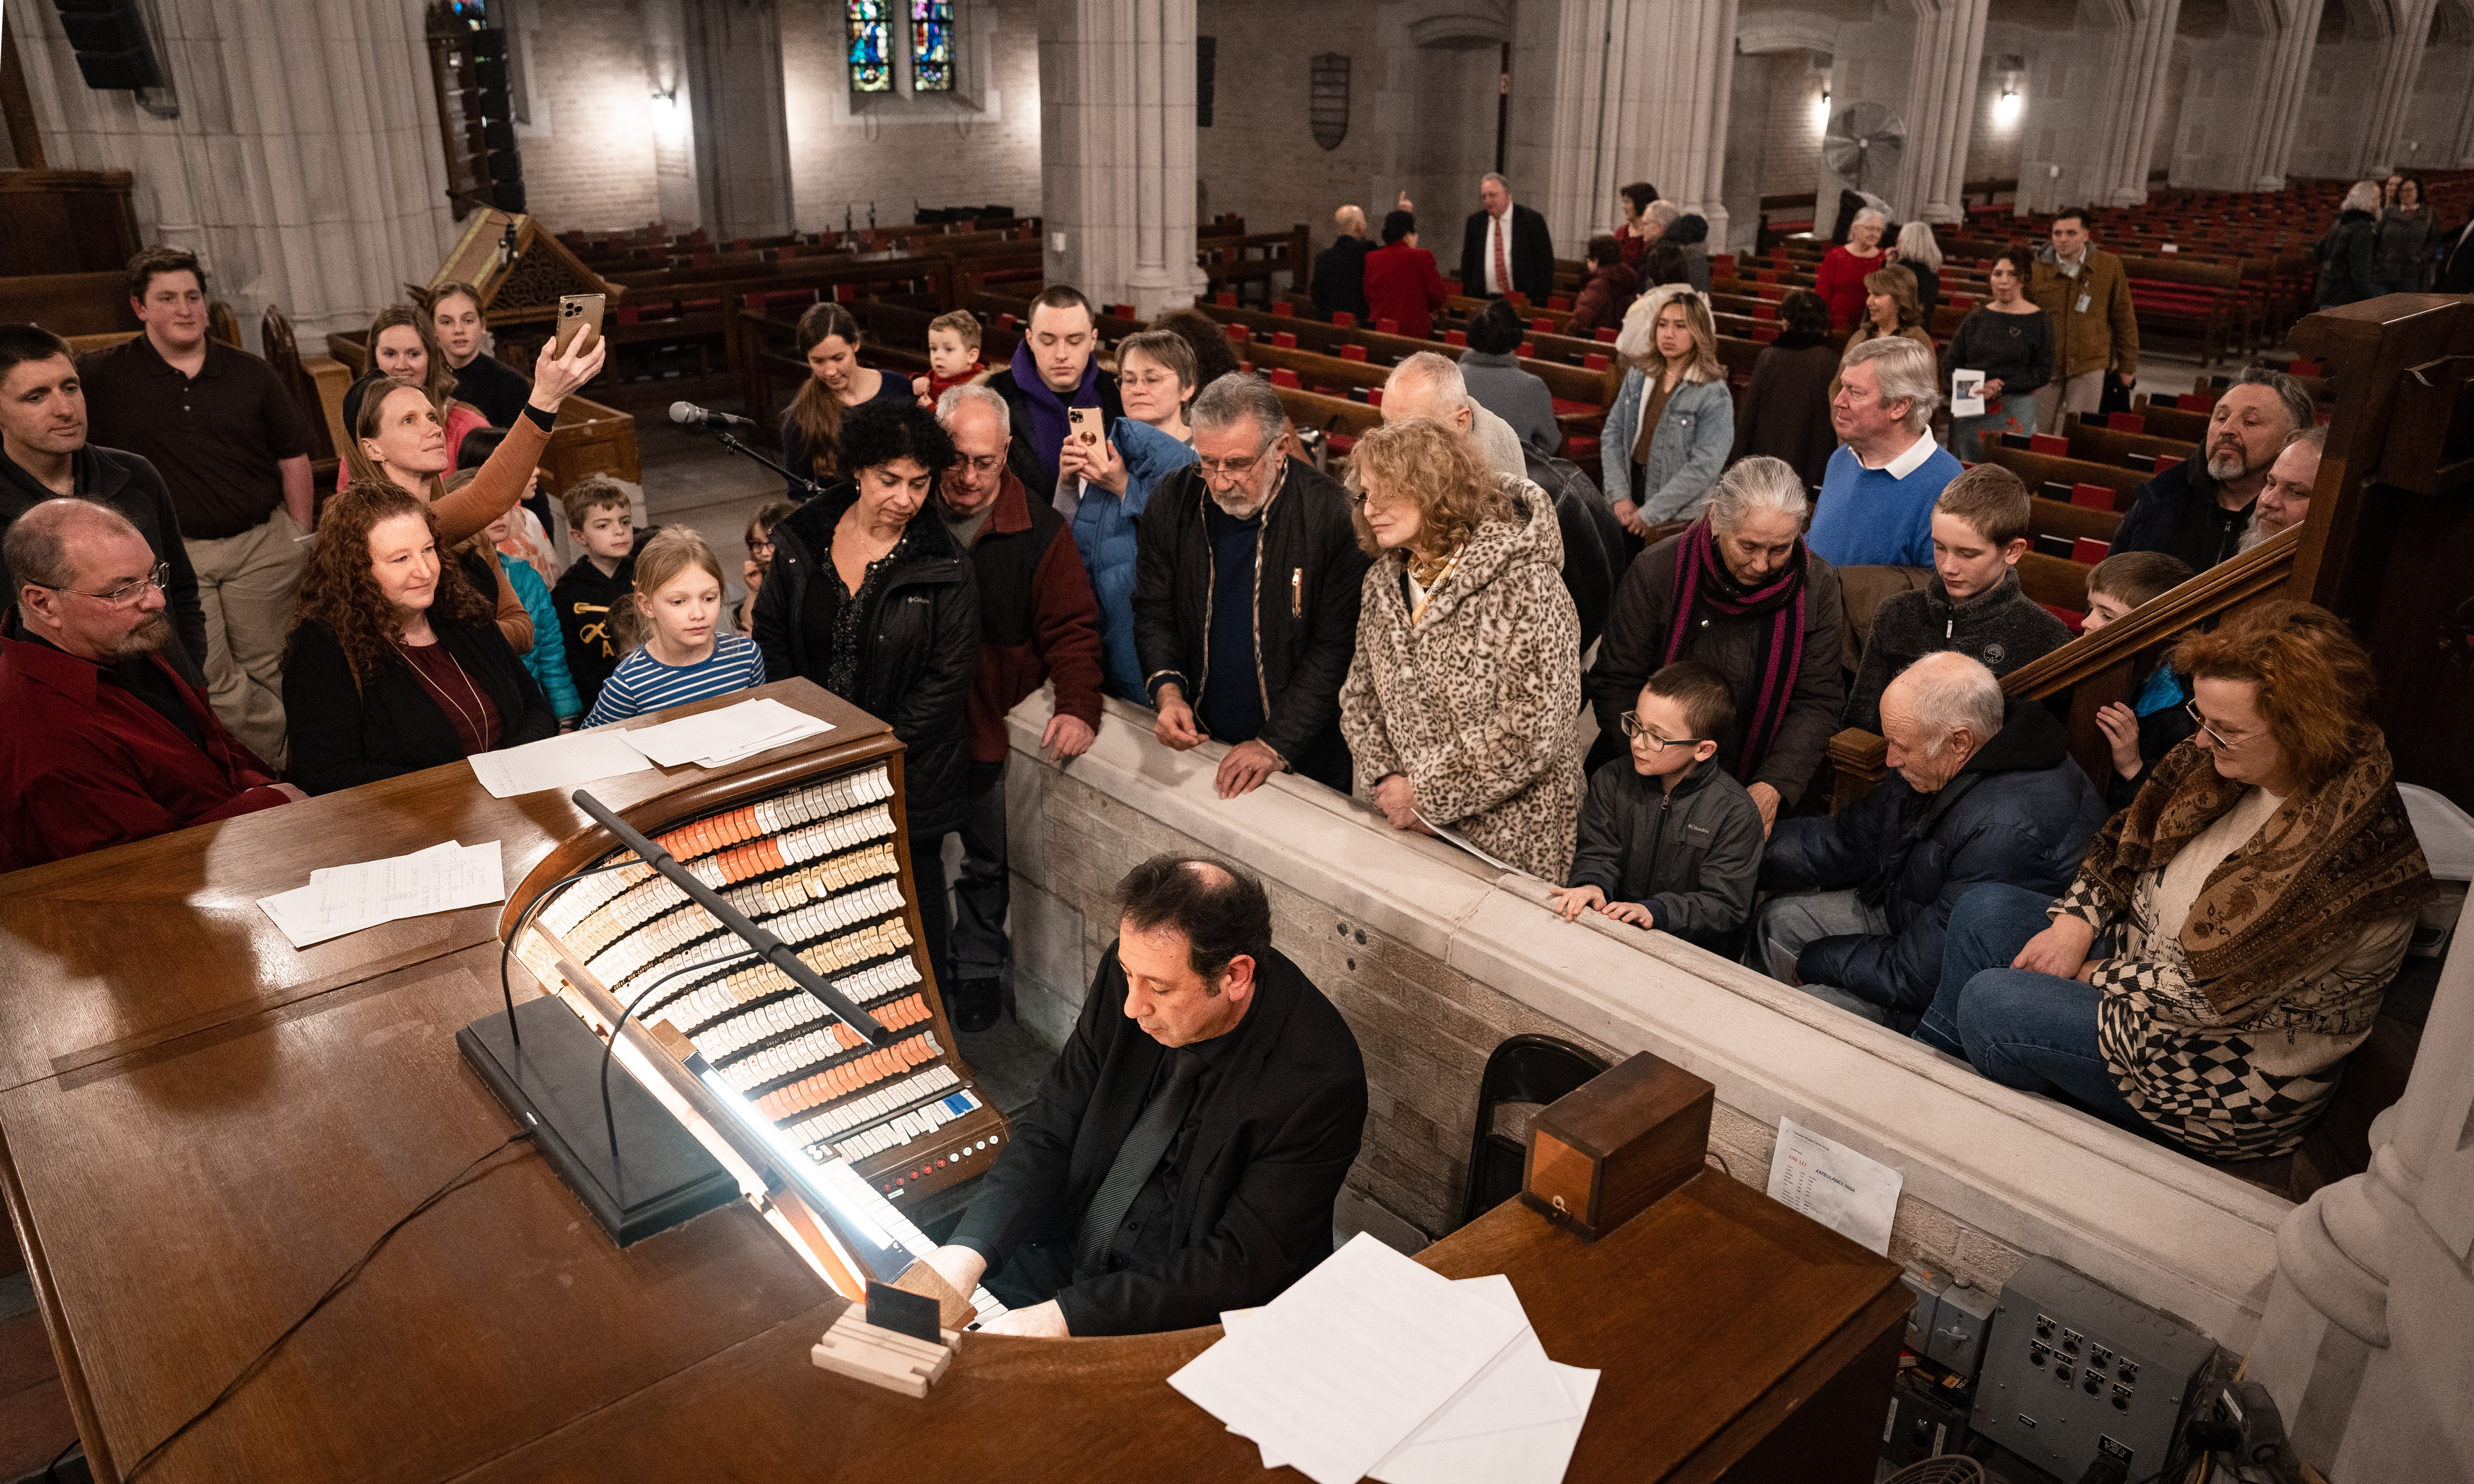 PHOTOS: Italian Organist Uplifts Audience at Chapel in New York | The Epoch  Times